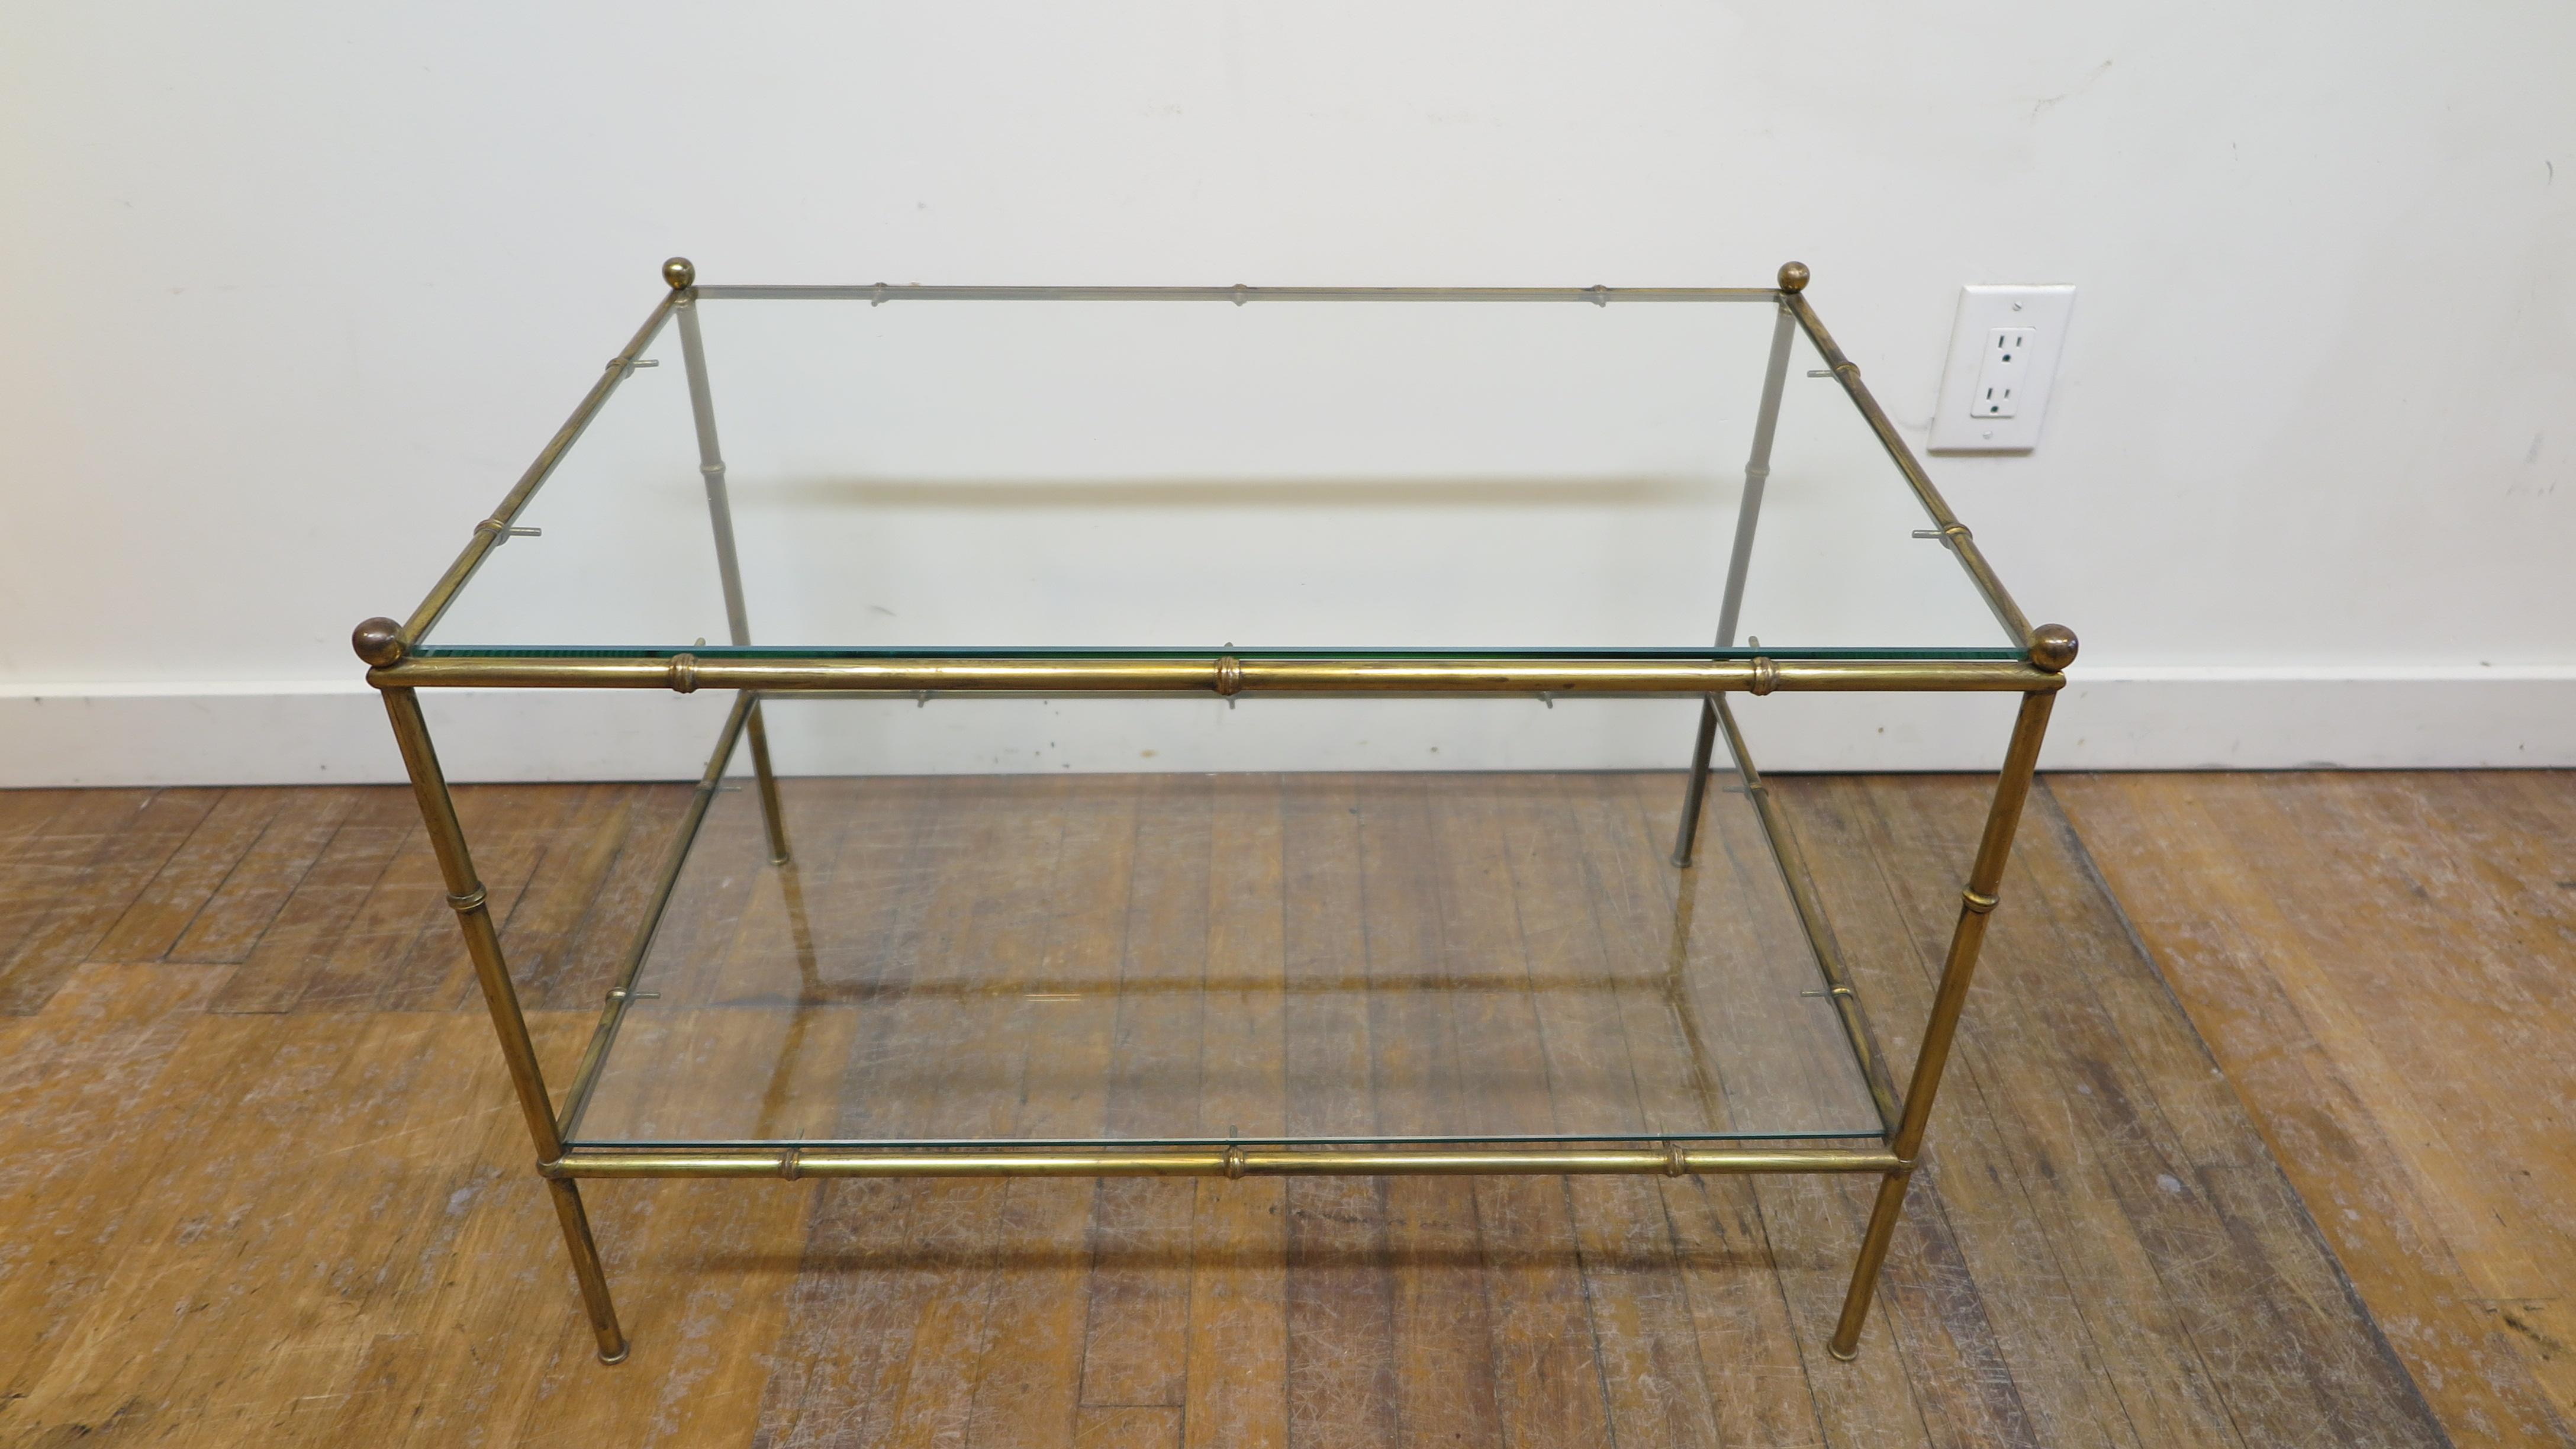 French midcentury brass and glass faux bamboo style cocktail table set of 3 pieces.
Wonderful set of three brass cocktail tables. Elegant modernist brass bamboo stylized table set. Each table having a lower shelf. Can be used as the set of three